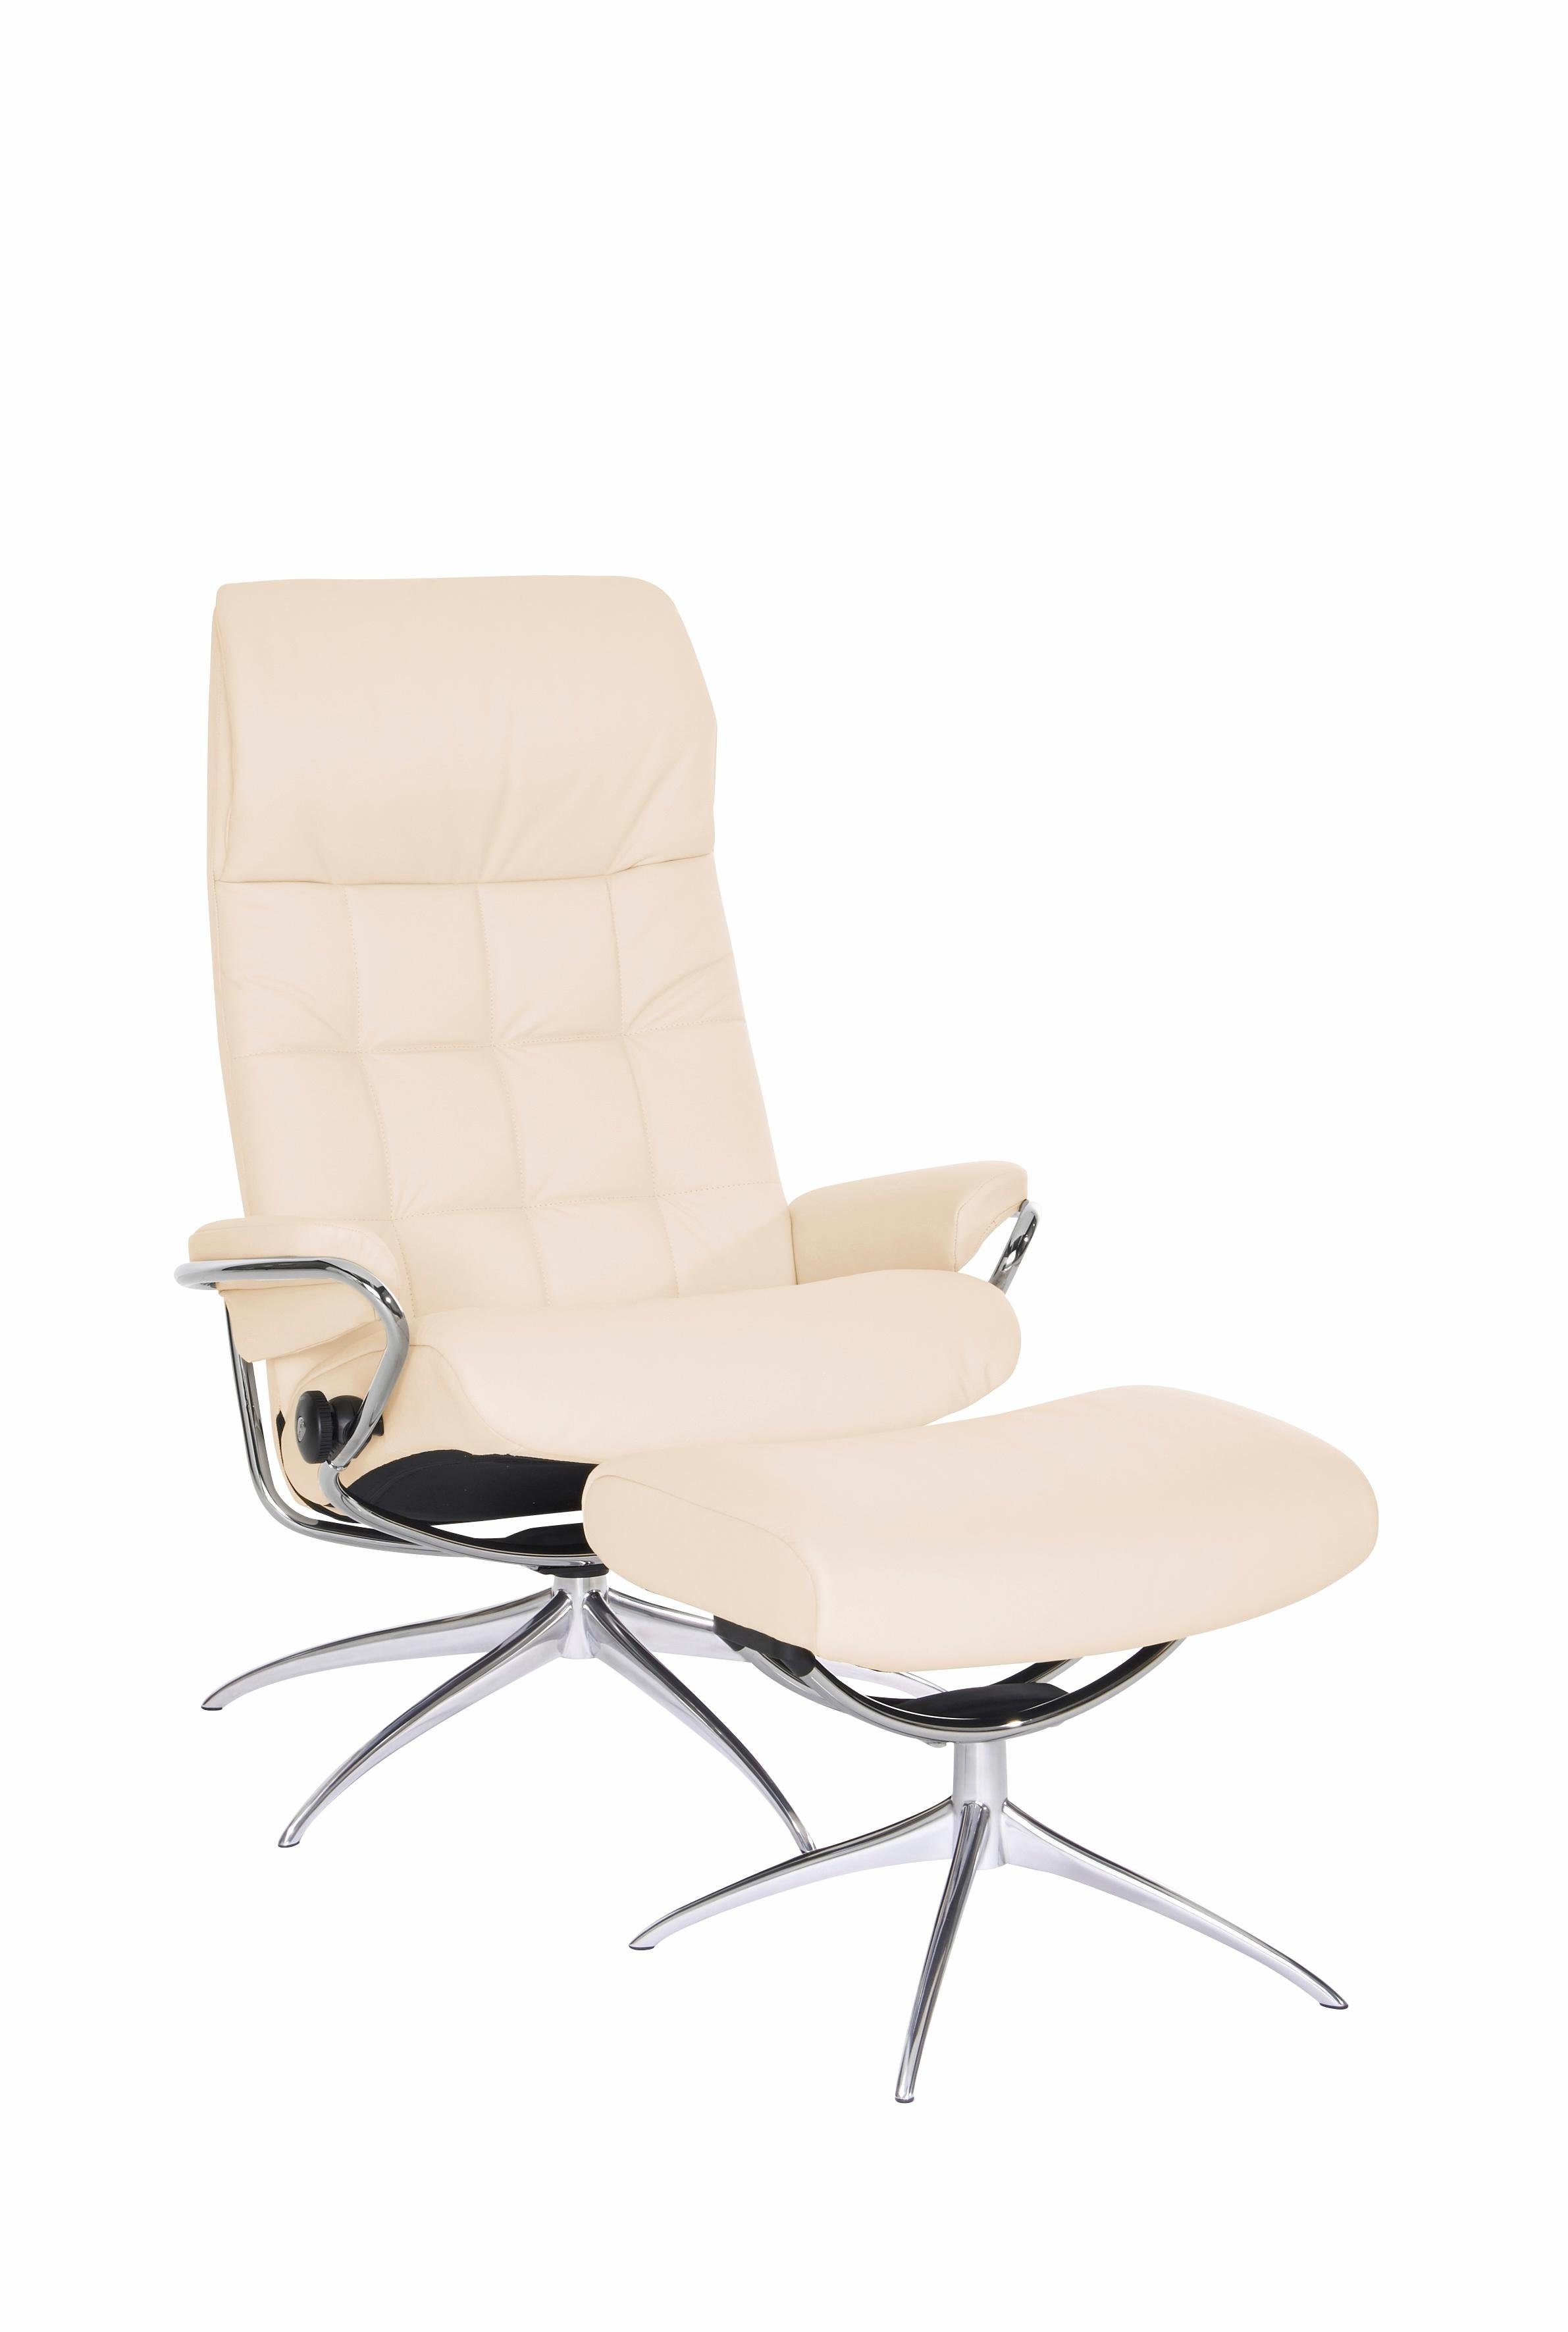 London mit High Relaxsessel (Set, Base, Gestell Relaxsessel Hocker, Hocker), Star mit Stressless® mit Chrom Back,